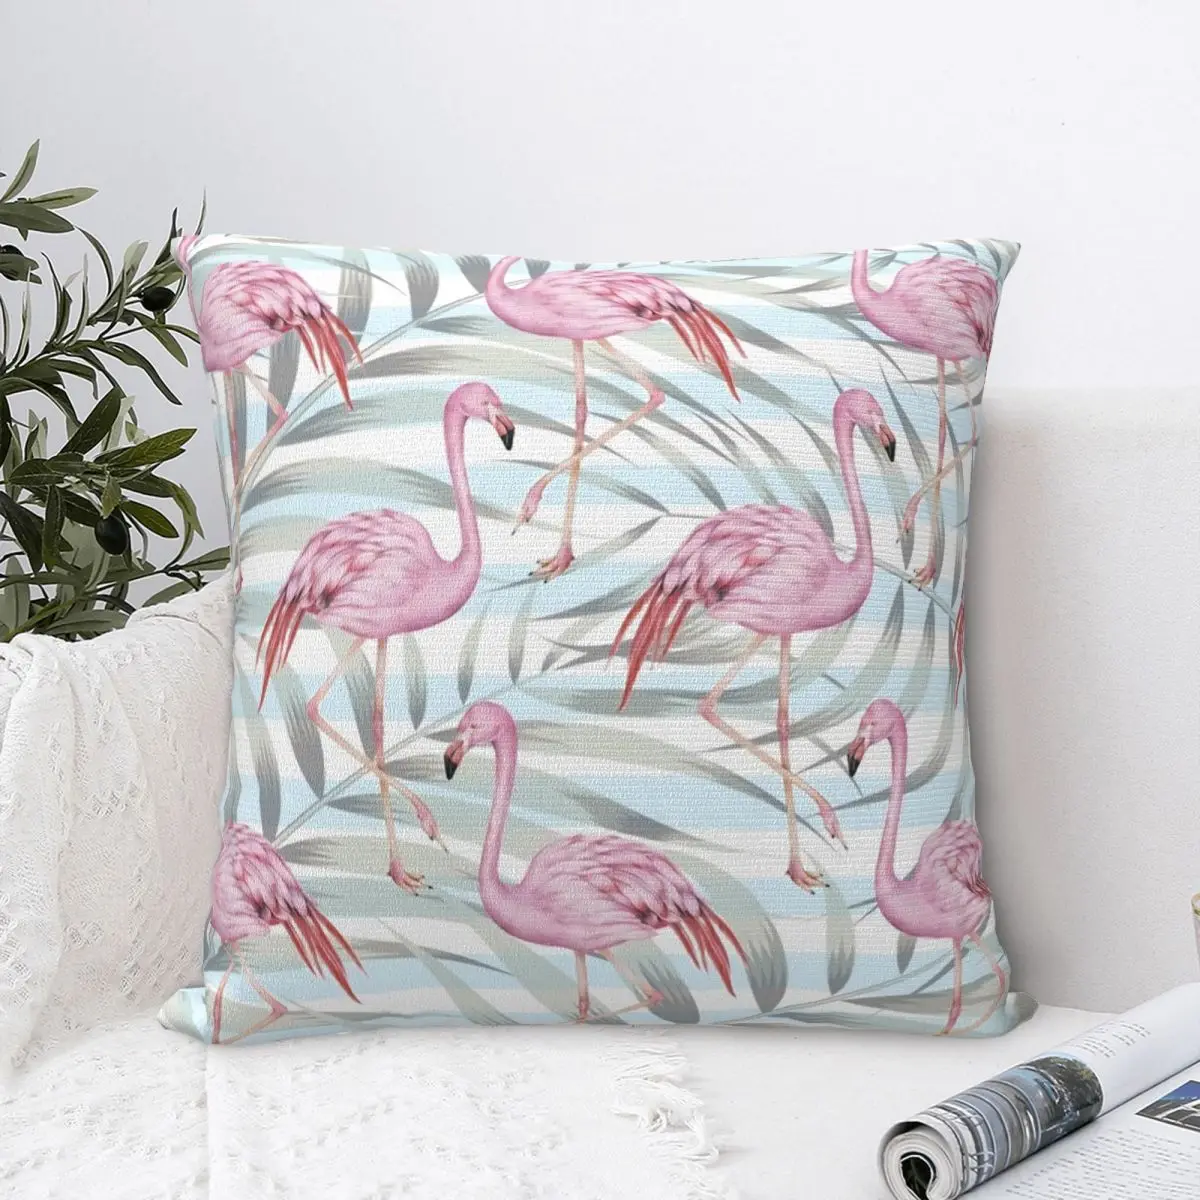 

Pink Flamingo Pillow Cover Palms Leaves Cushion Cover Graphic Pillow Case Morden Pillowcases For Sofa Car Home Decor